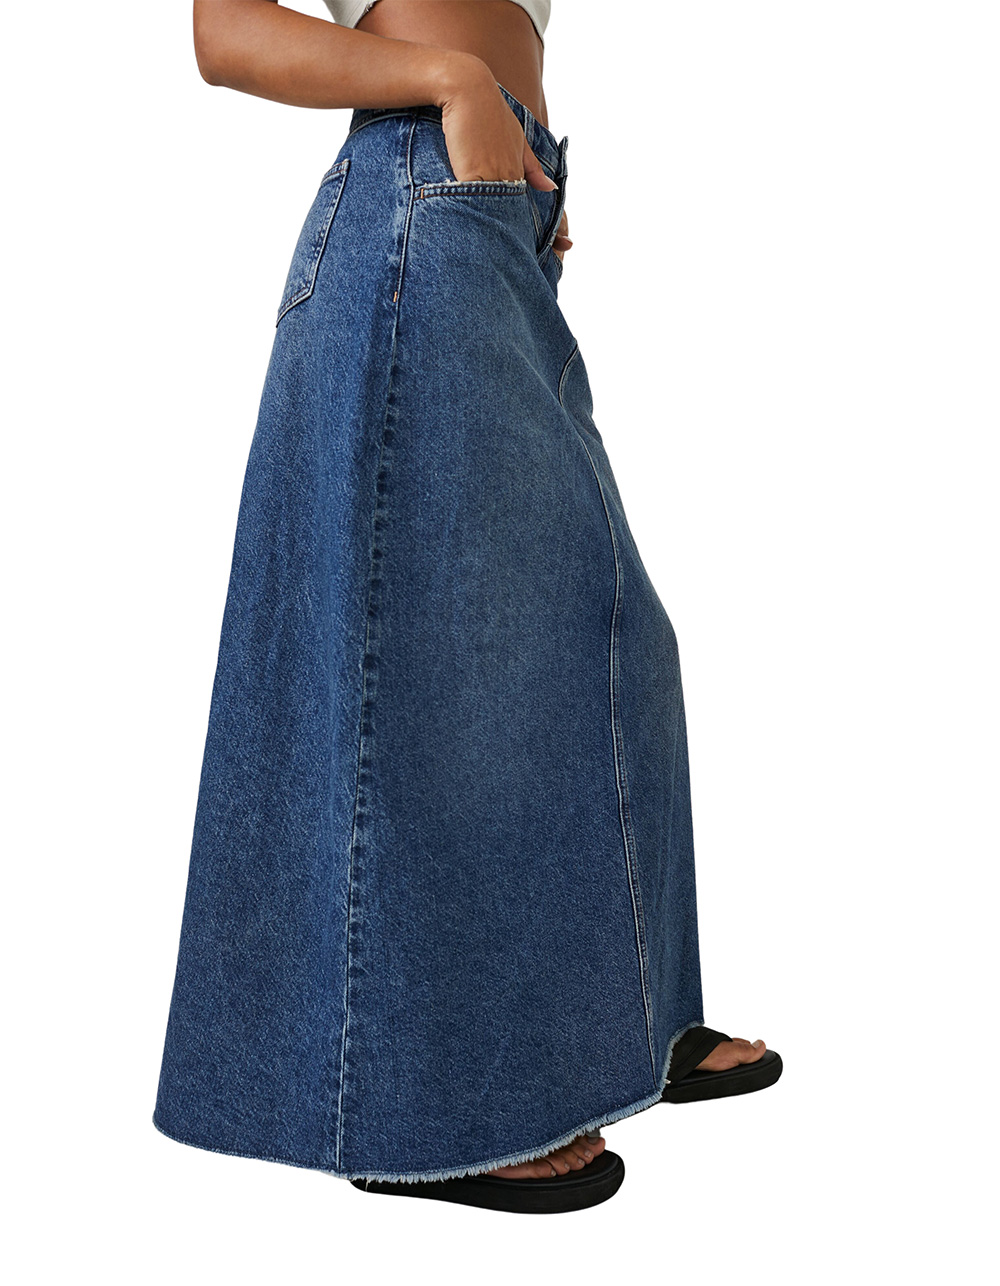 FREE PEOPLE Come As You Are Denim Maxi Skirt - MEDIUM WASH | Tillys